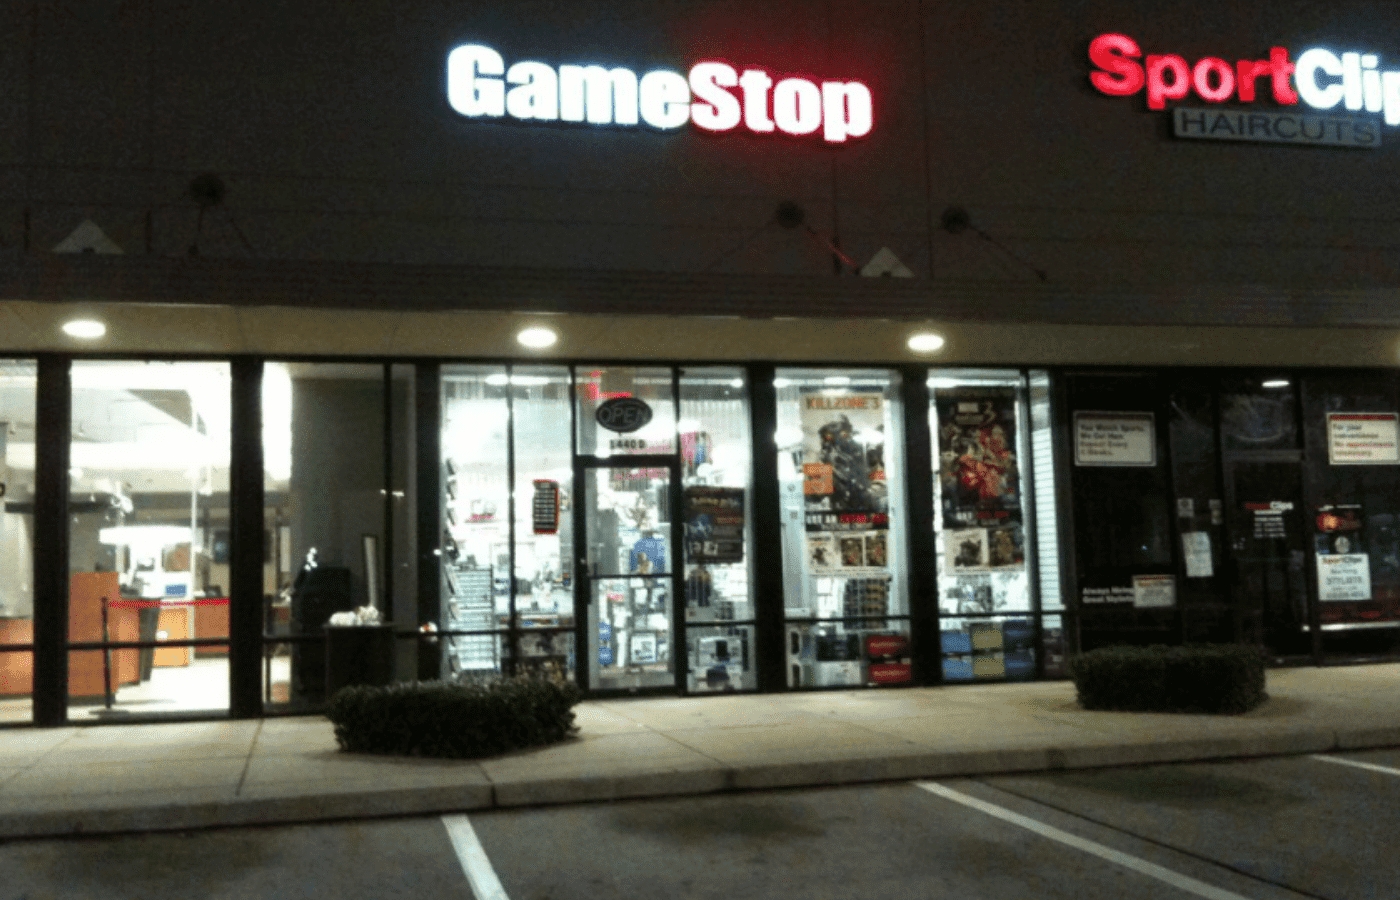 can you dumpster dive at gamestop